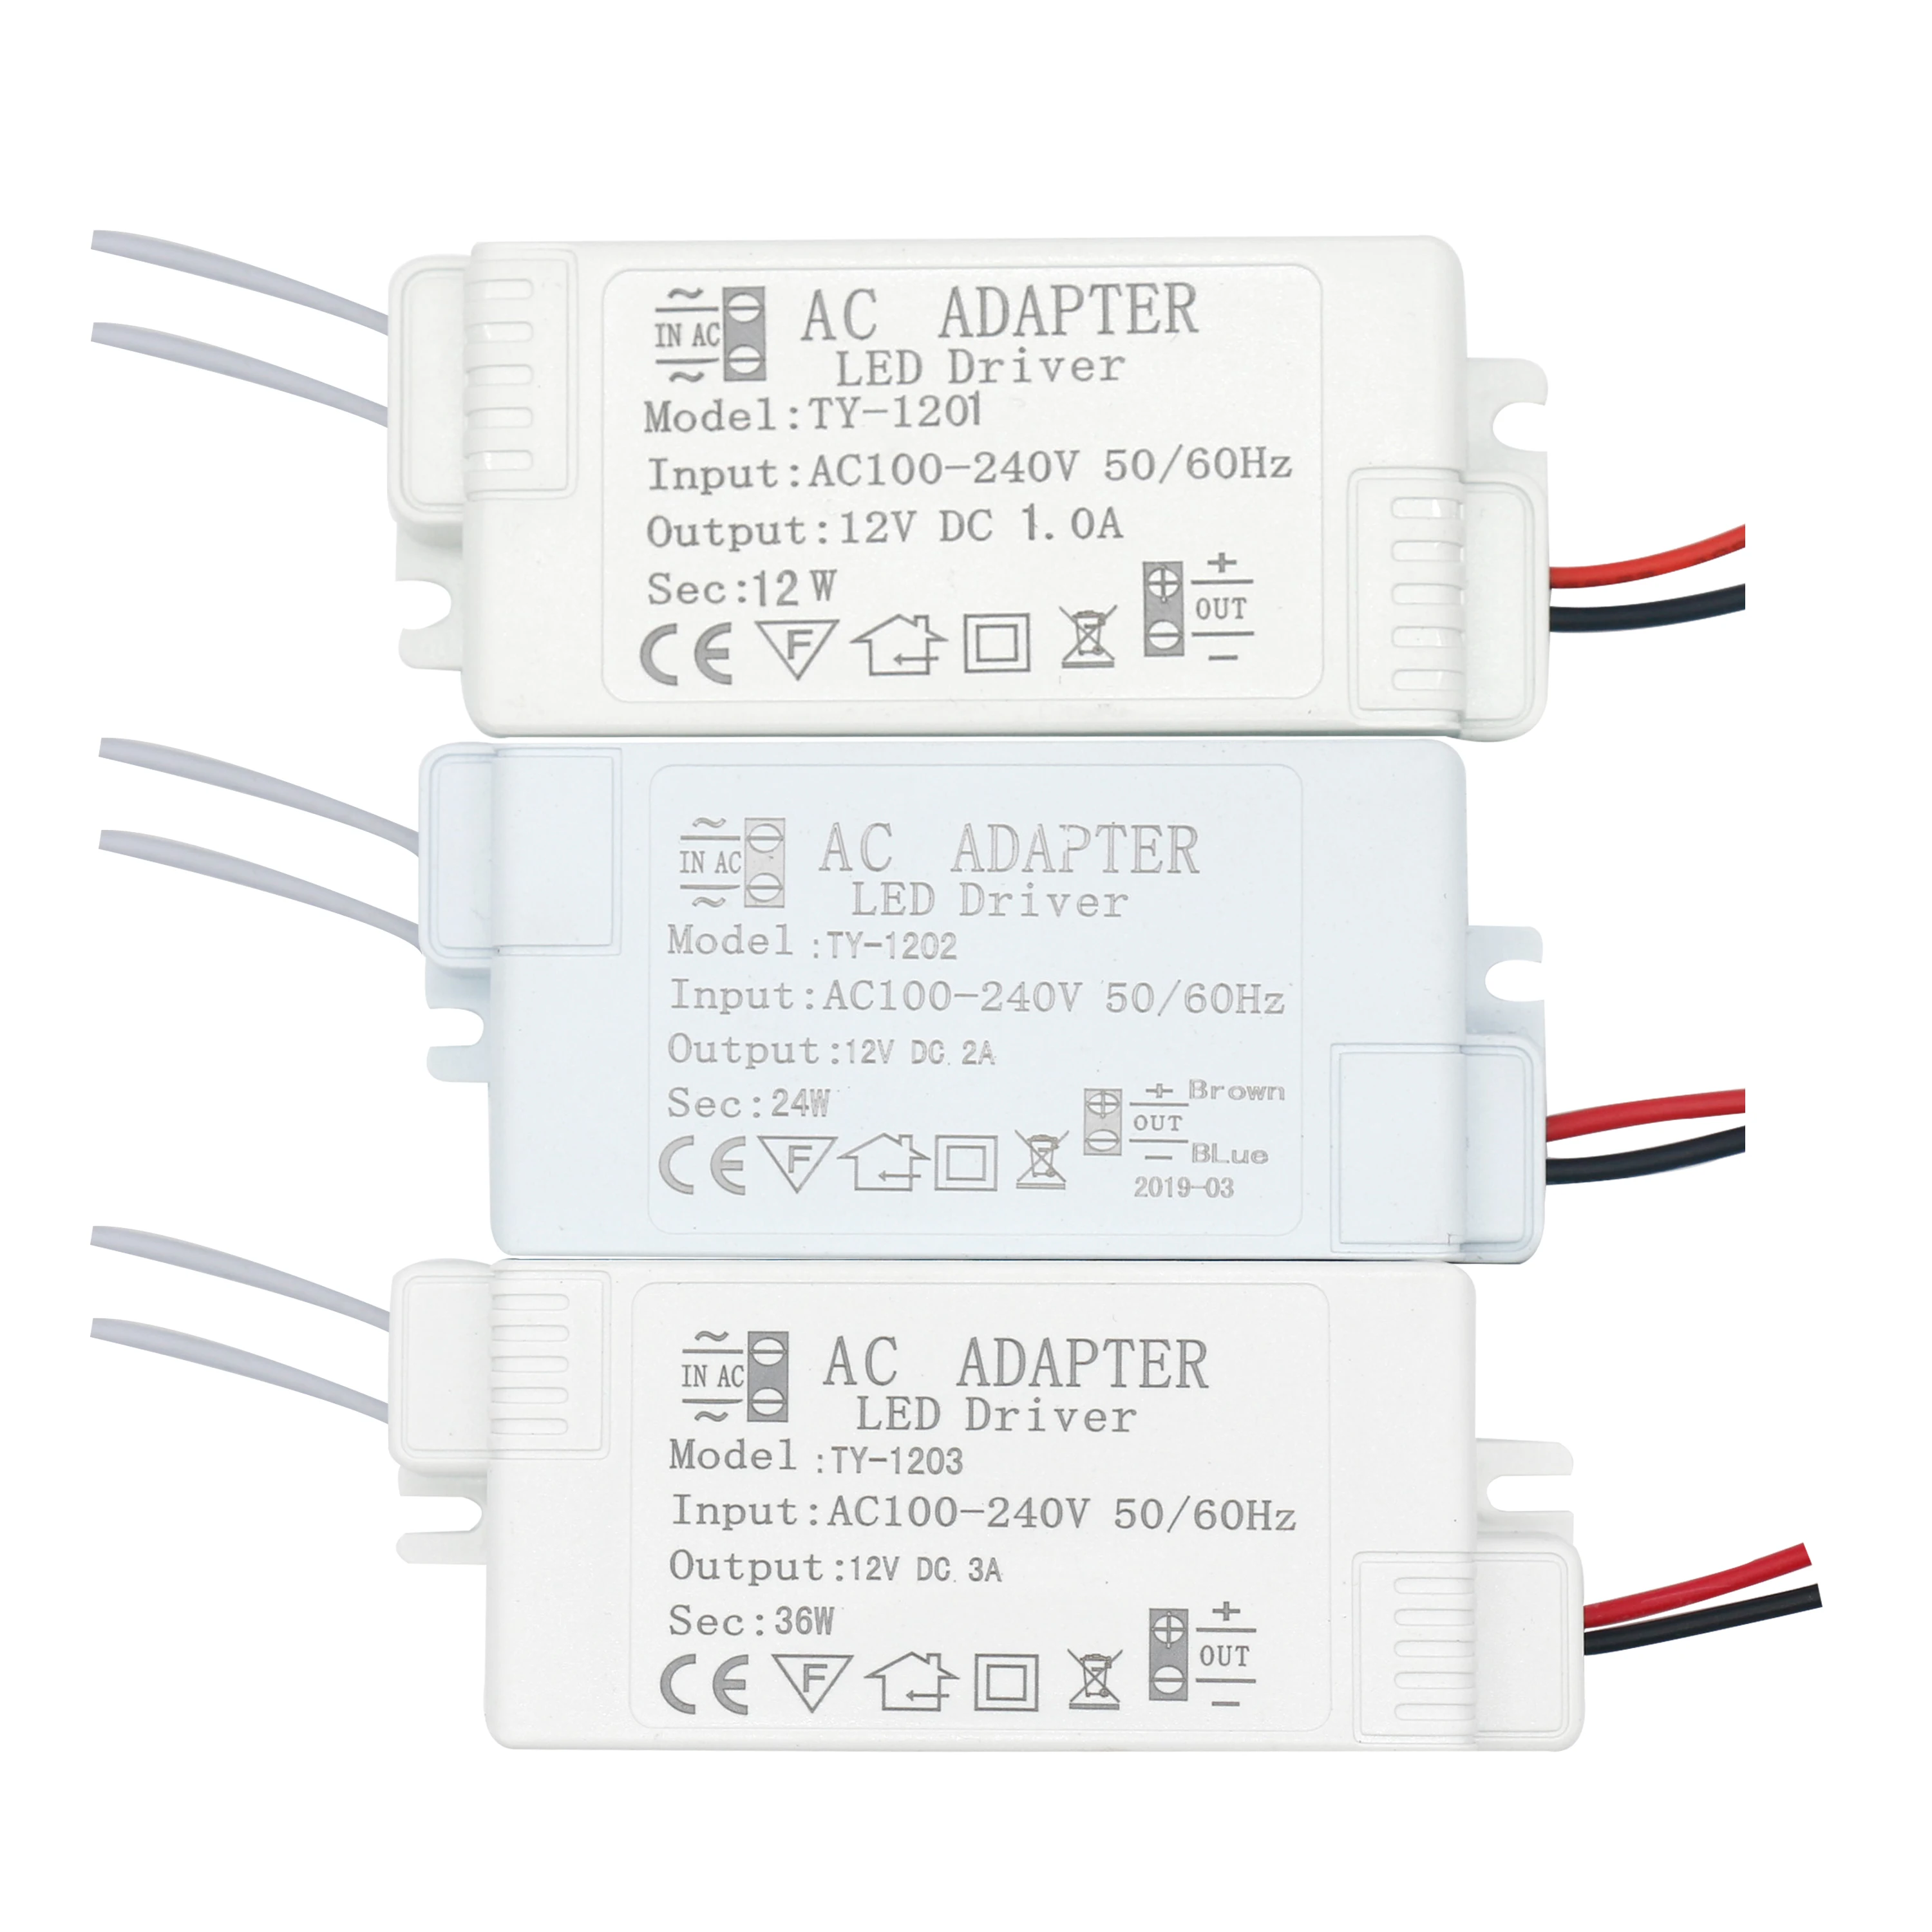 DC12V 60W 36W 24W 12W LED Driver 1A 2A 3A 5A  LEDs AC220 to 12V Power Supply Constant Voltage For Control Lighting Transformers